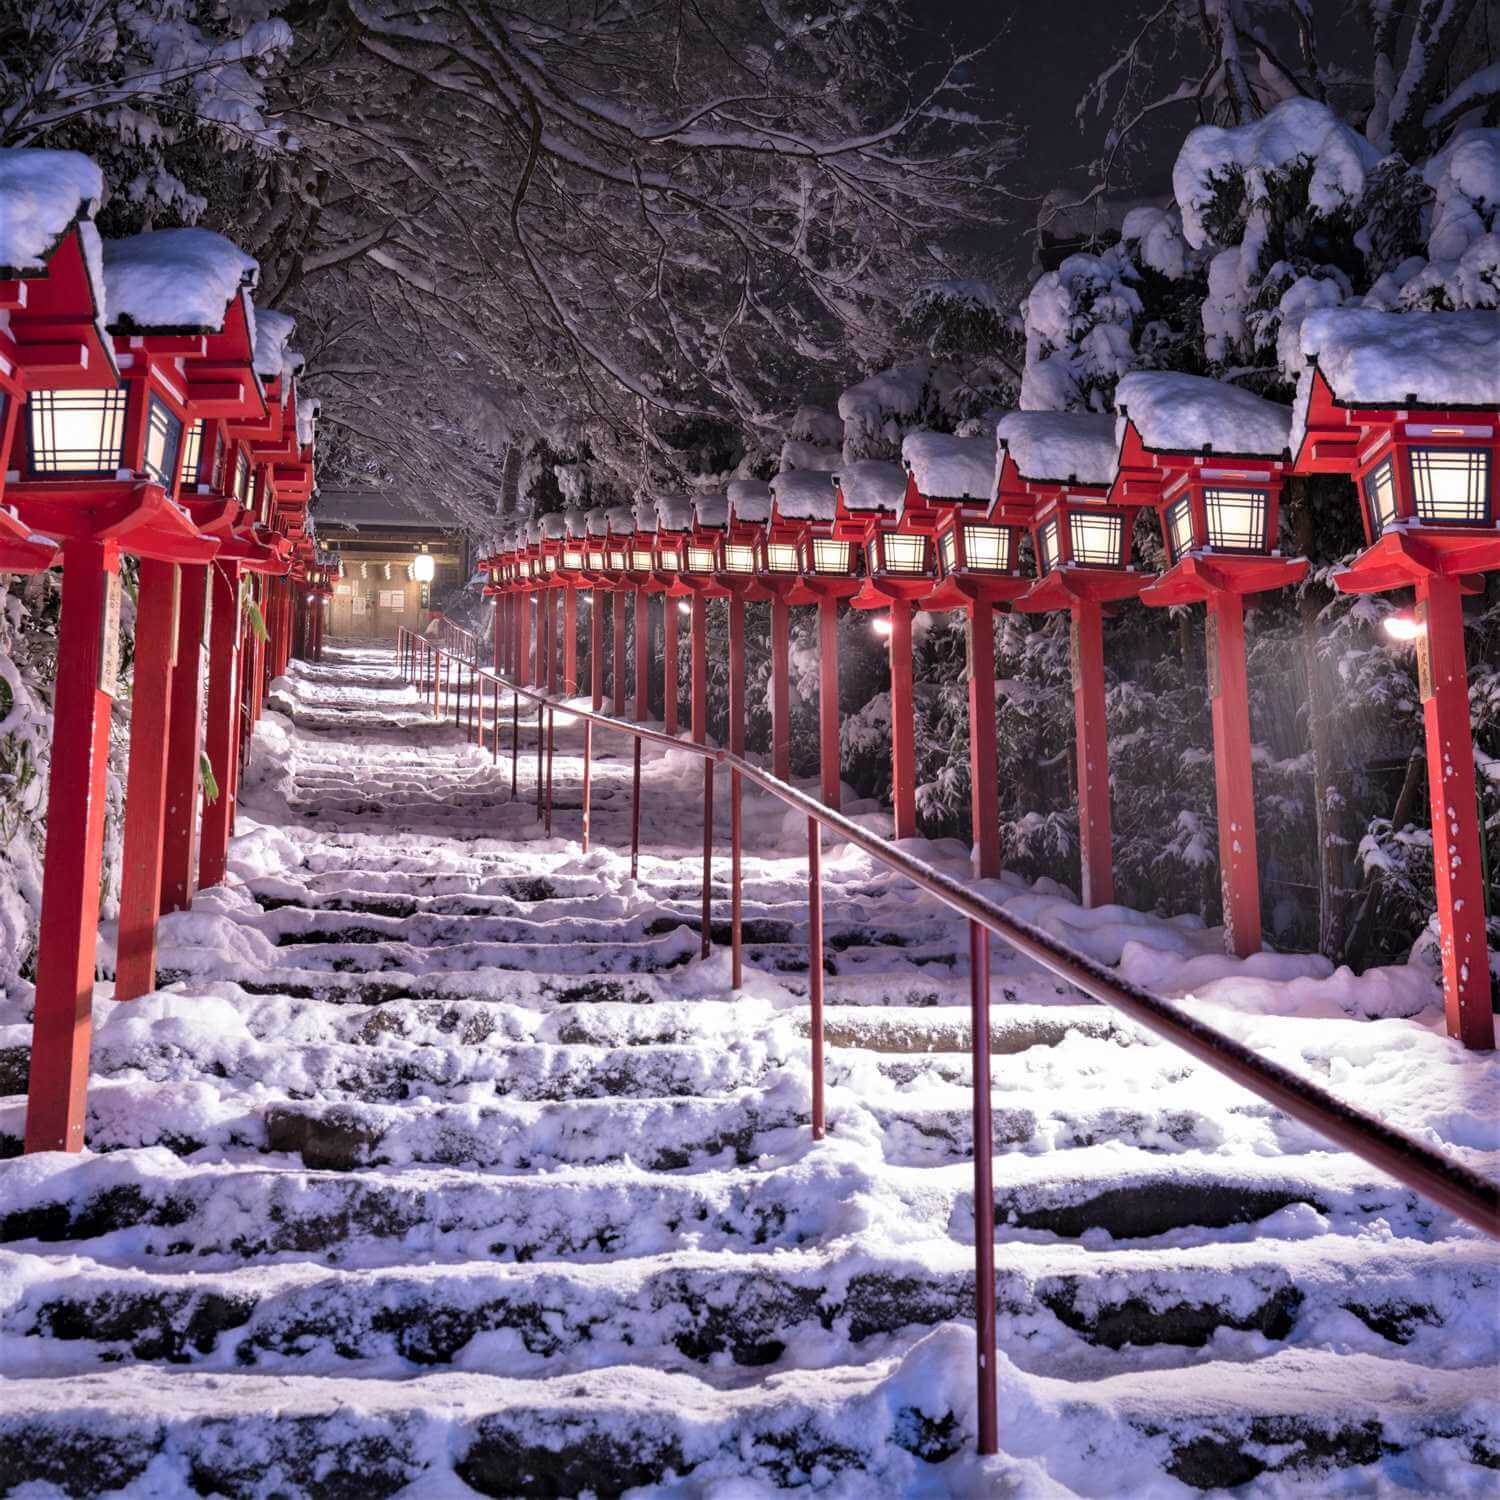 Kibune Shrine in northern Kyoto has more snow than in central Kyoto = Shutterstock